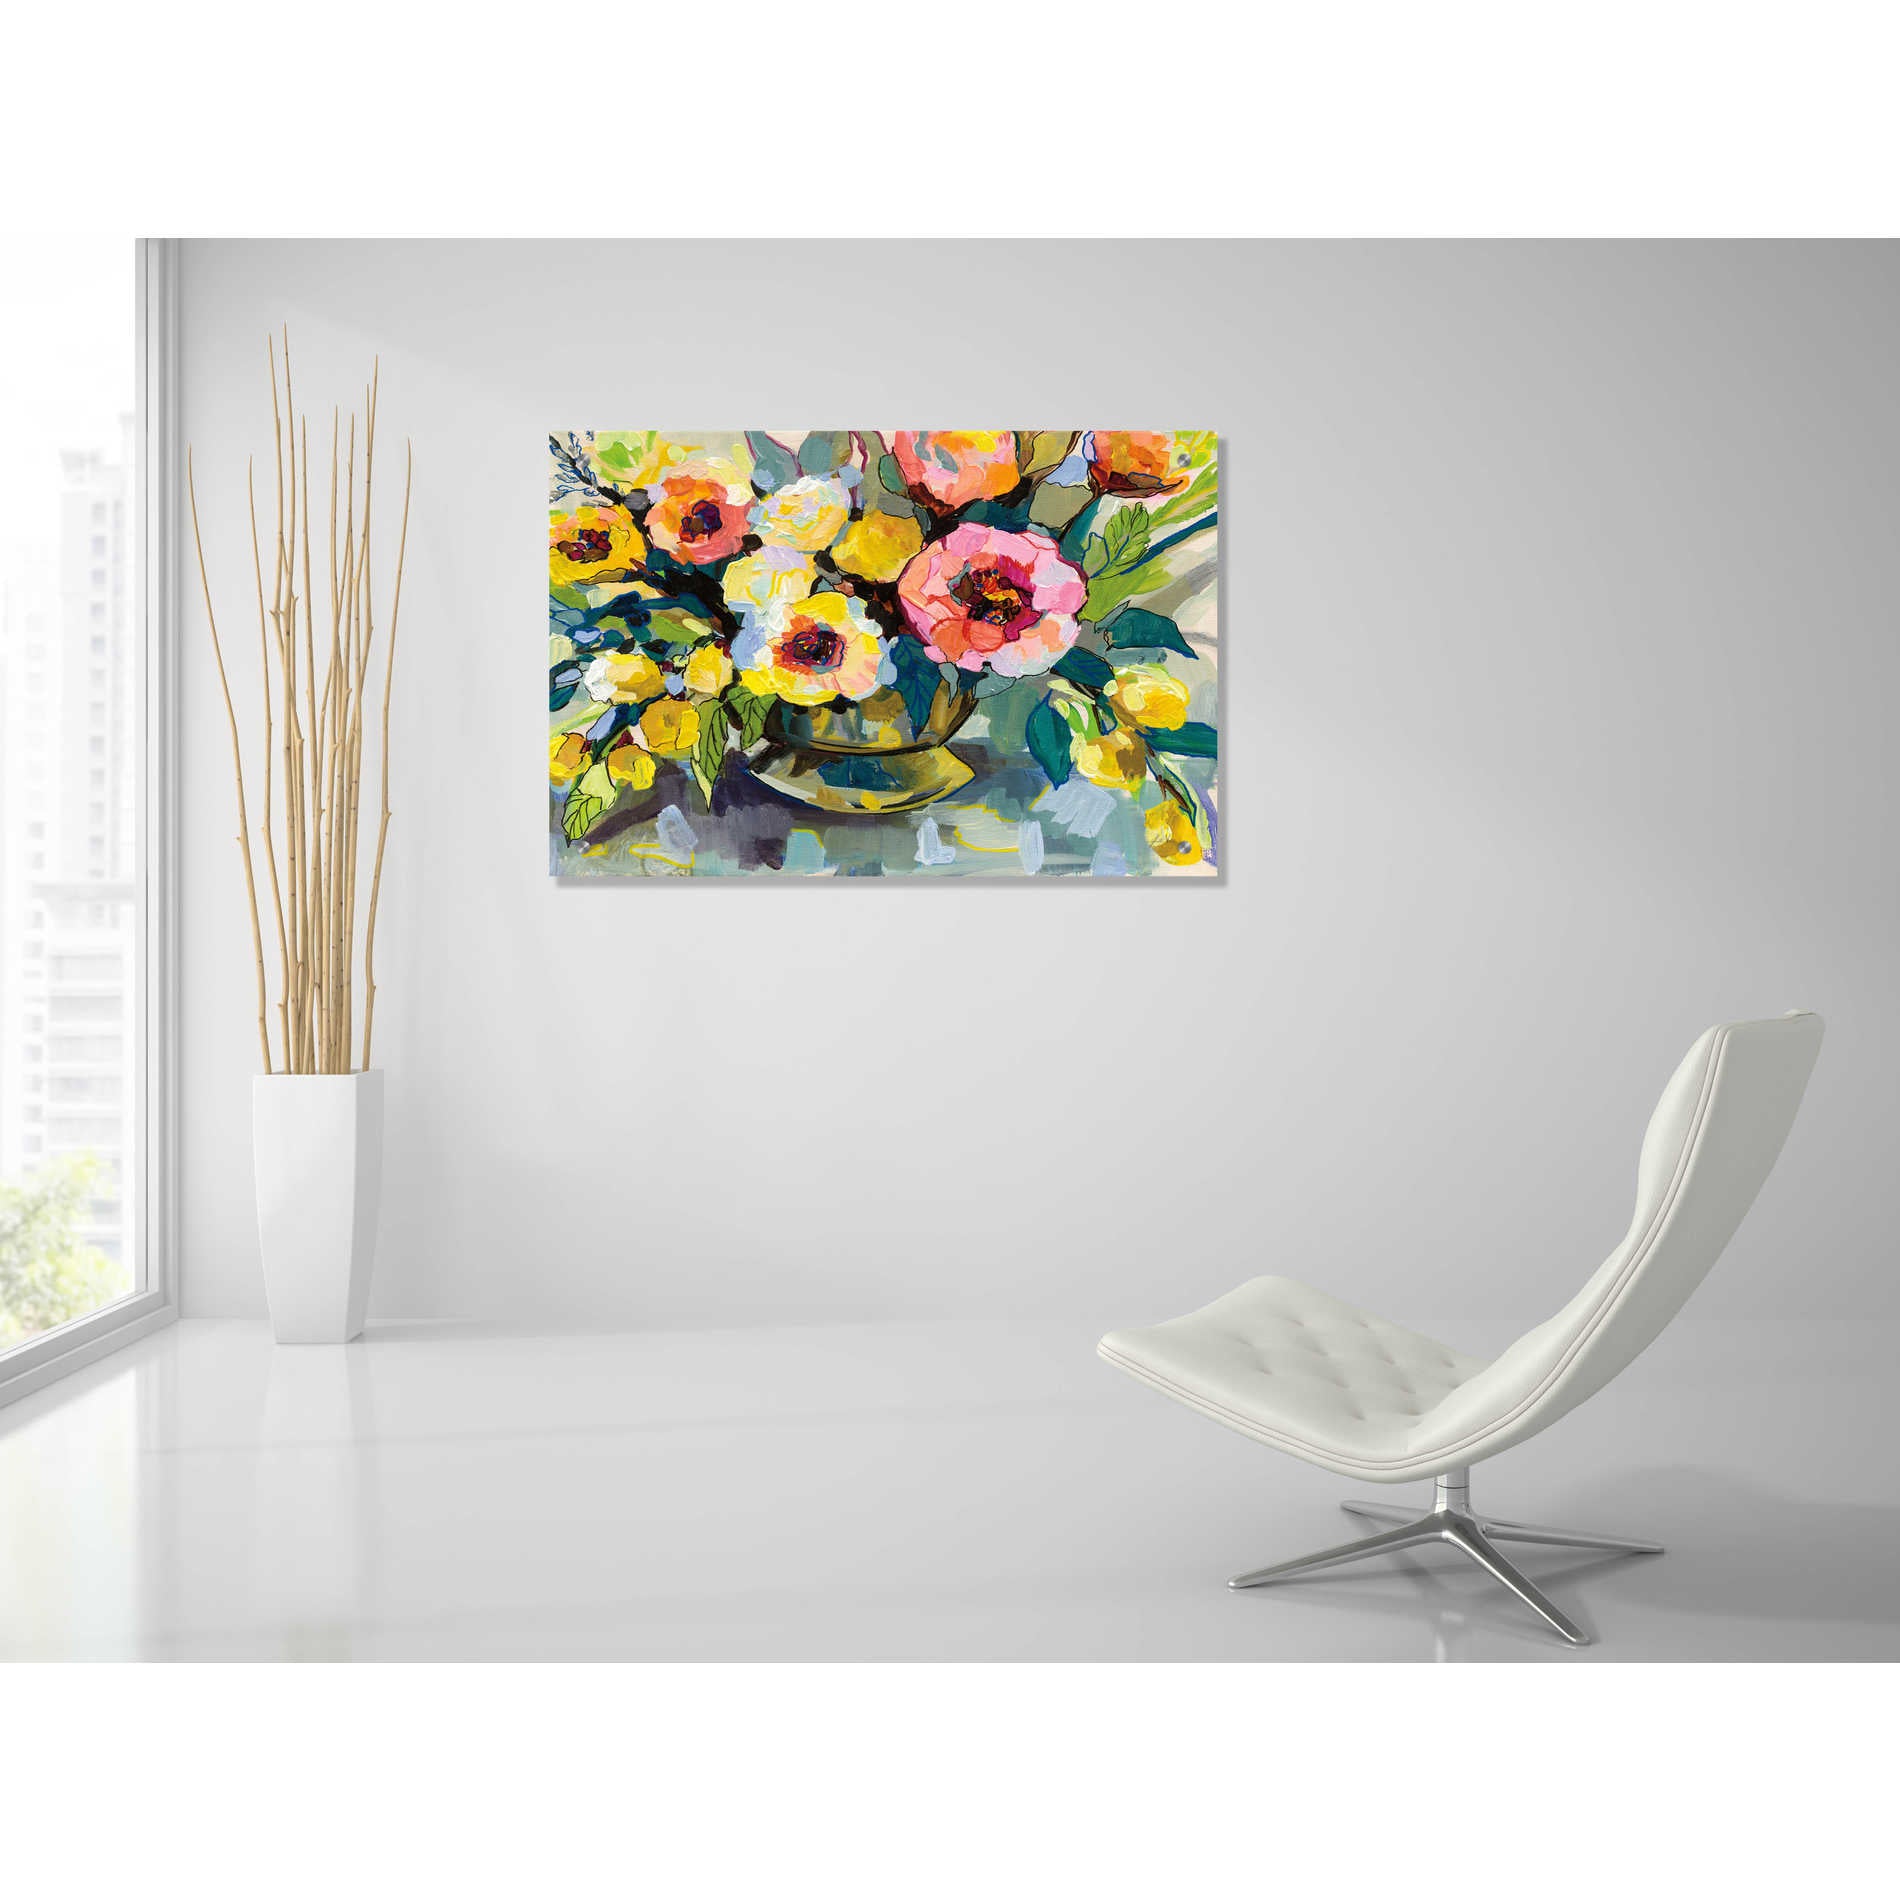 Epic Art 'Cottage Bouquet' by Jeanette Vertentes, Acrylic Glass Wall Art,36x24